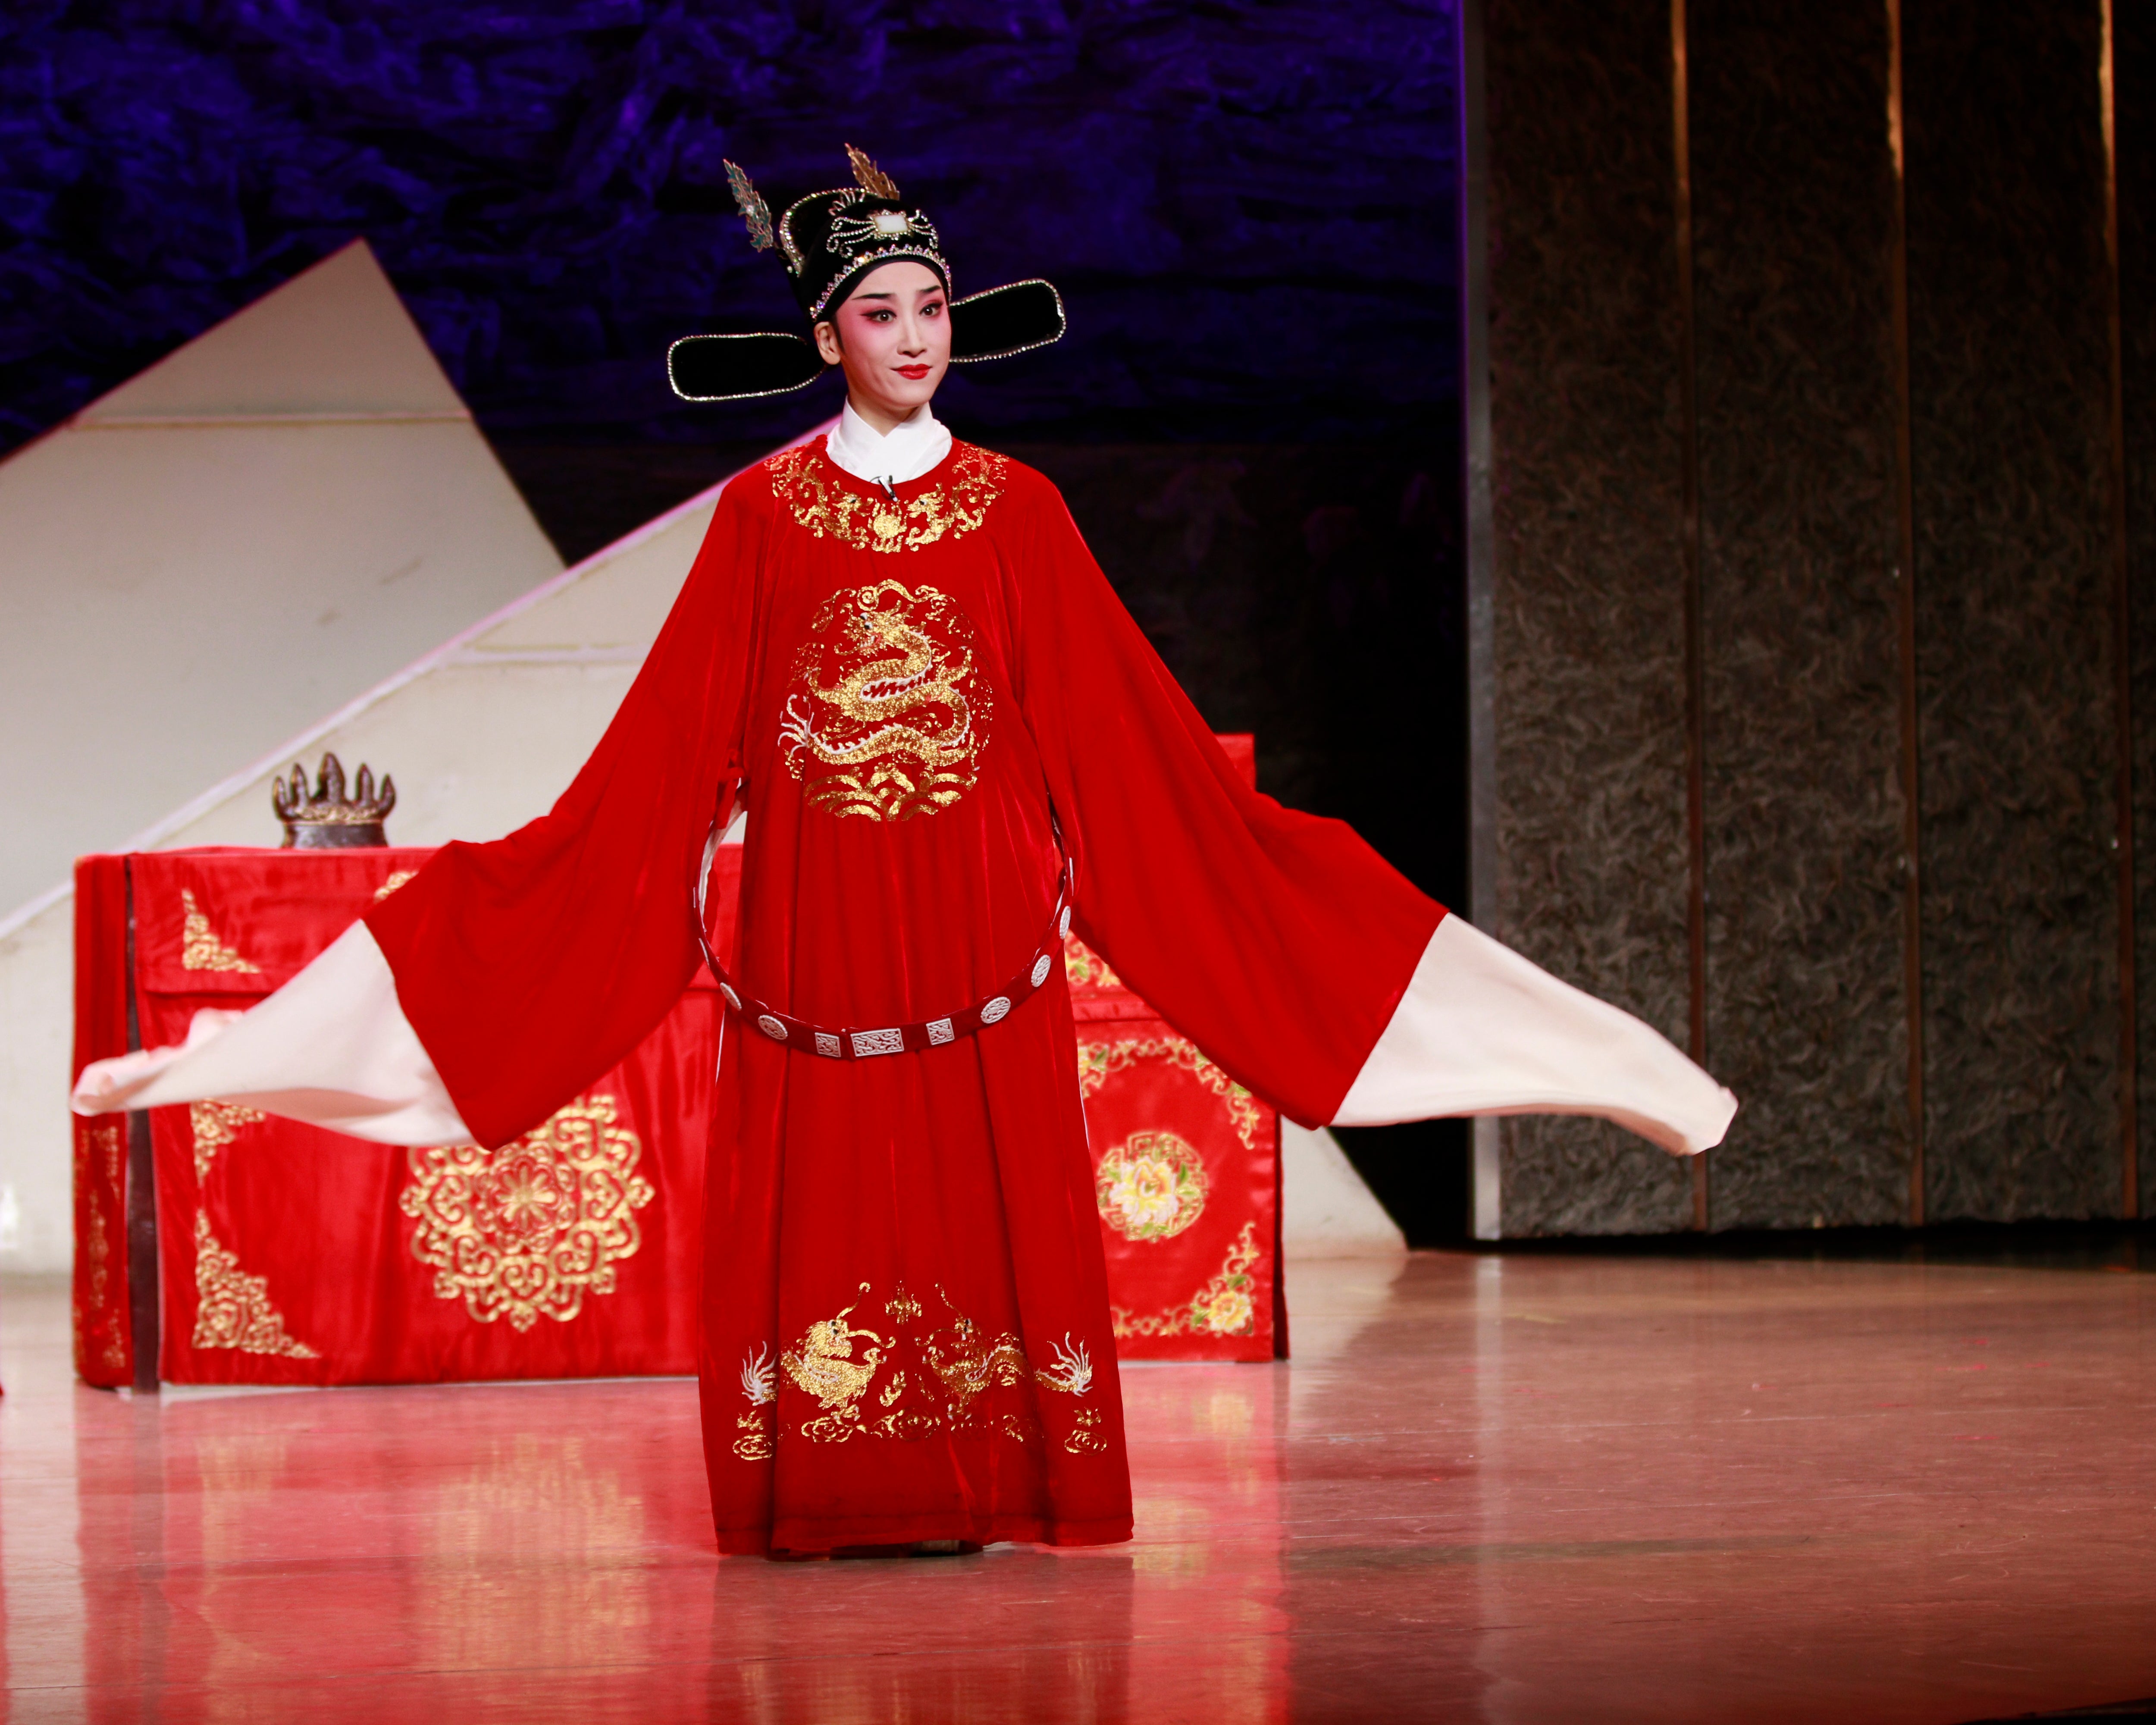 A Huangmei Opera performer on stage at a theatre in Anqing, Anhui province